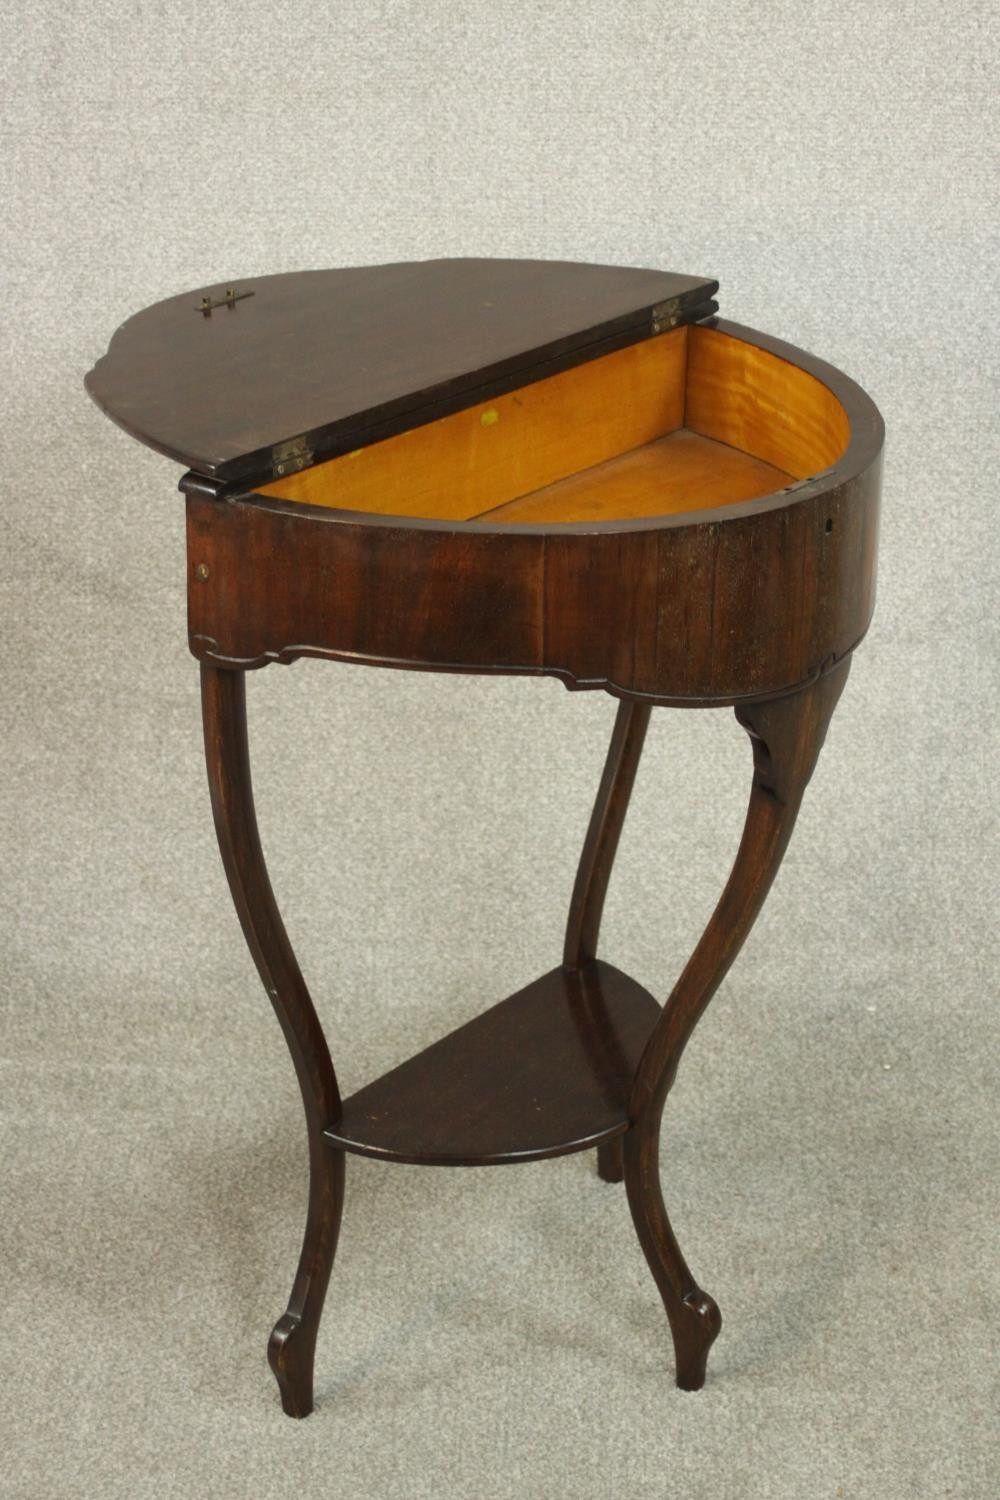 An early 20th century mahogany demi lune side table, with a foldover top opening to reveal a - Image 5 of 7